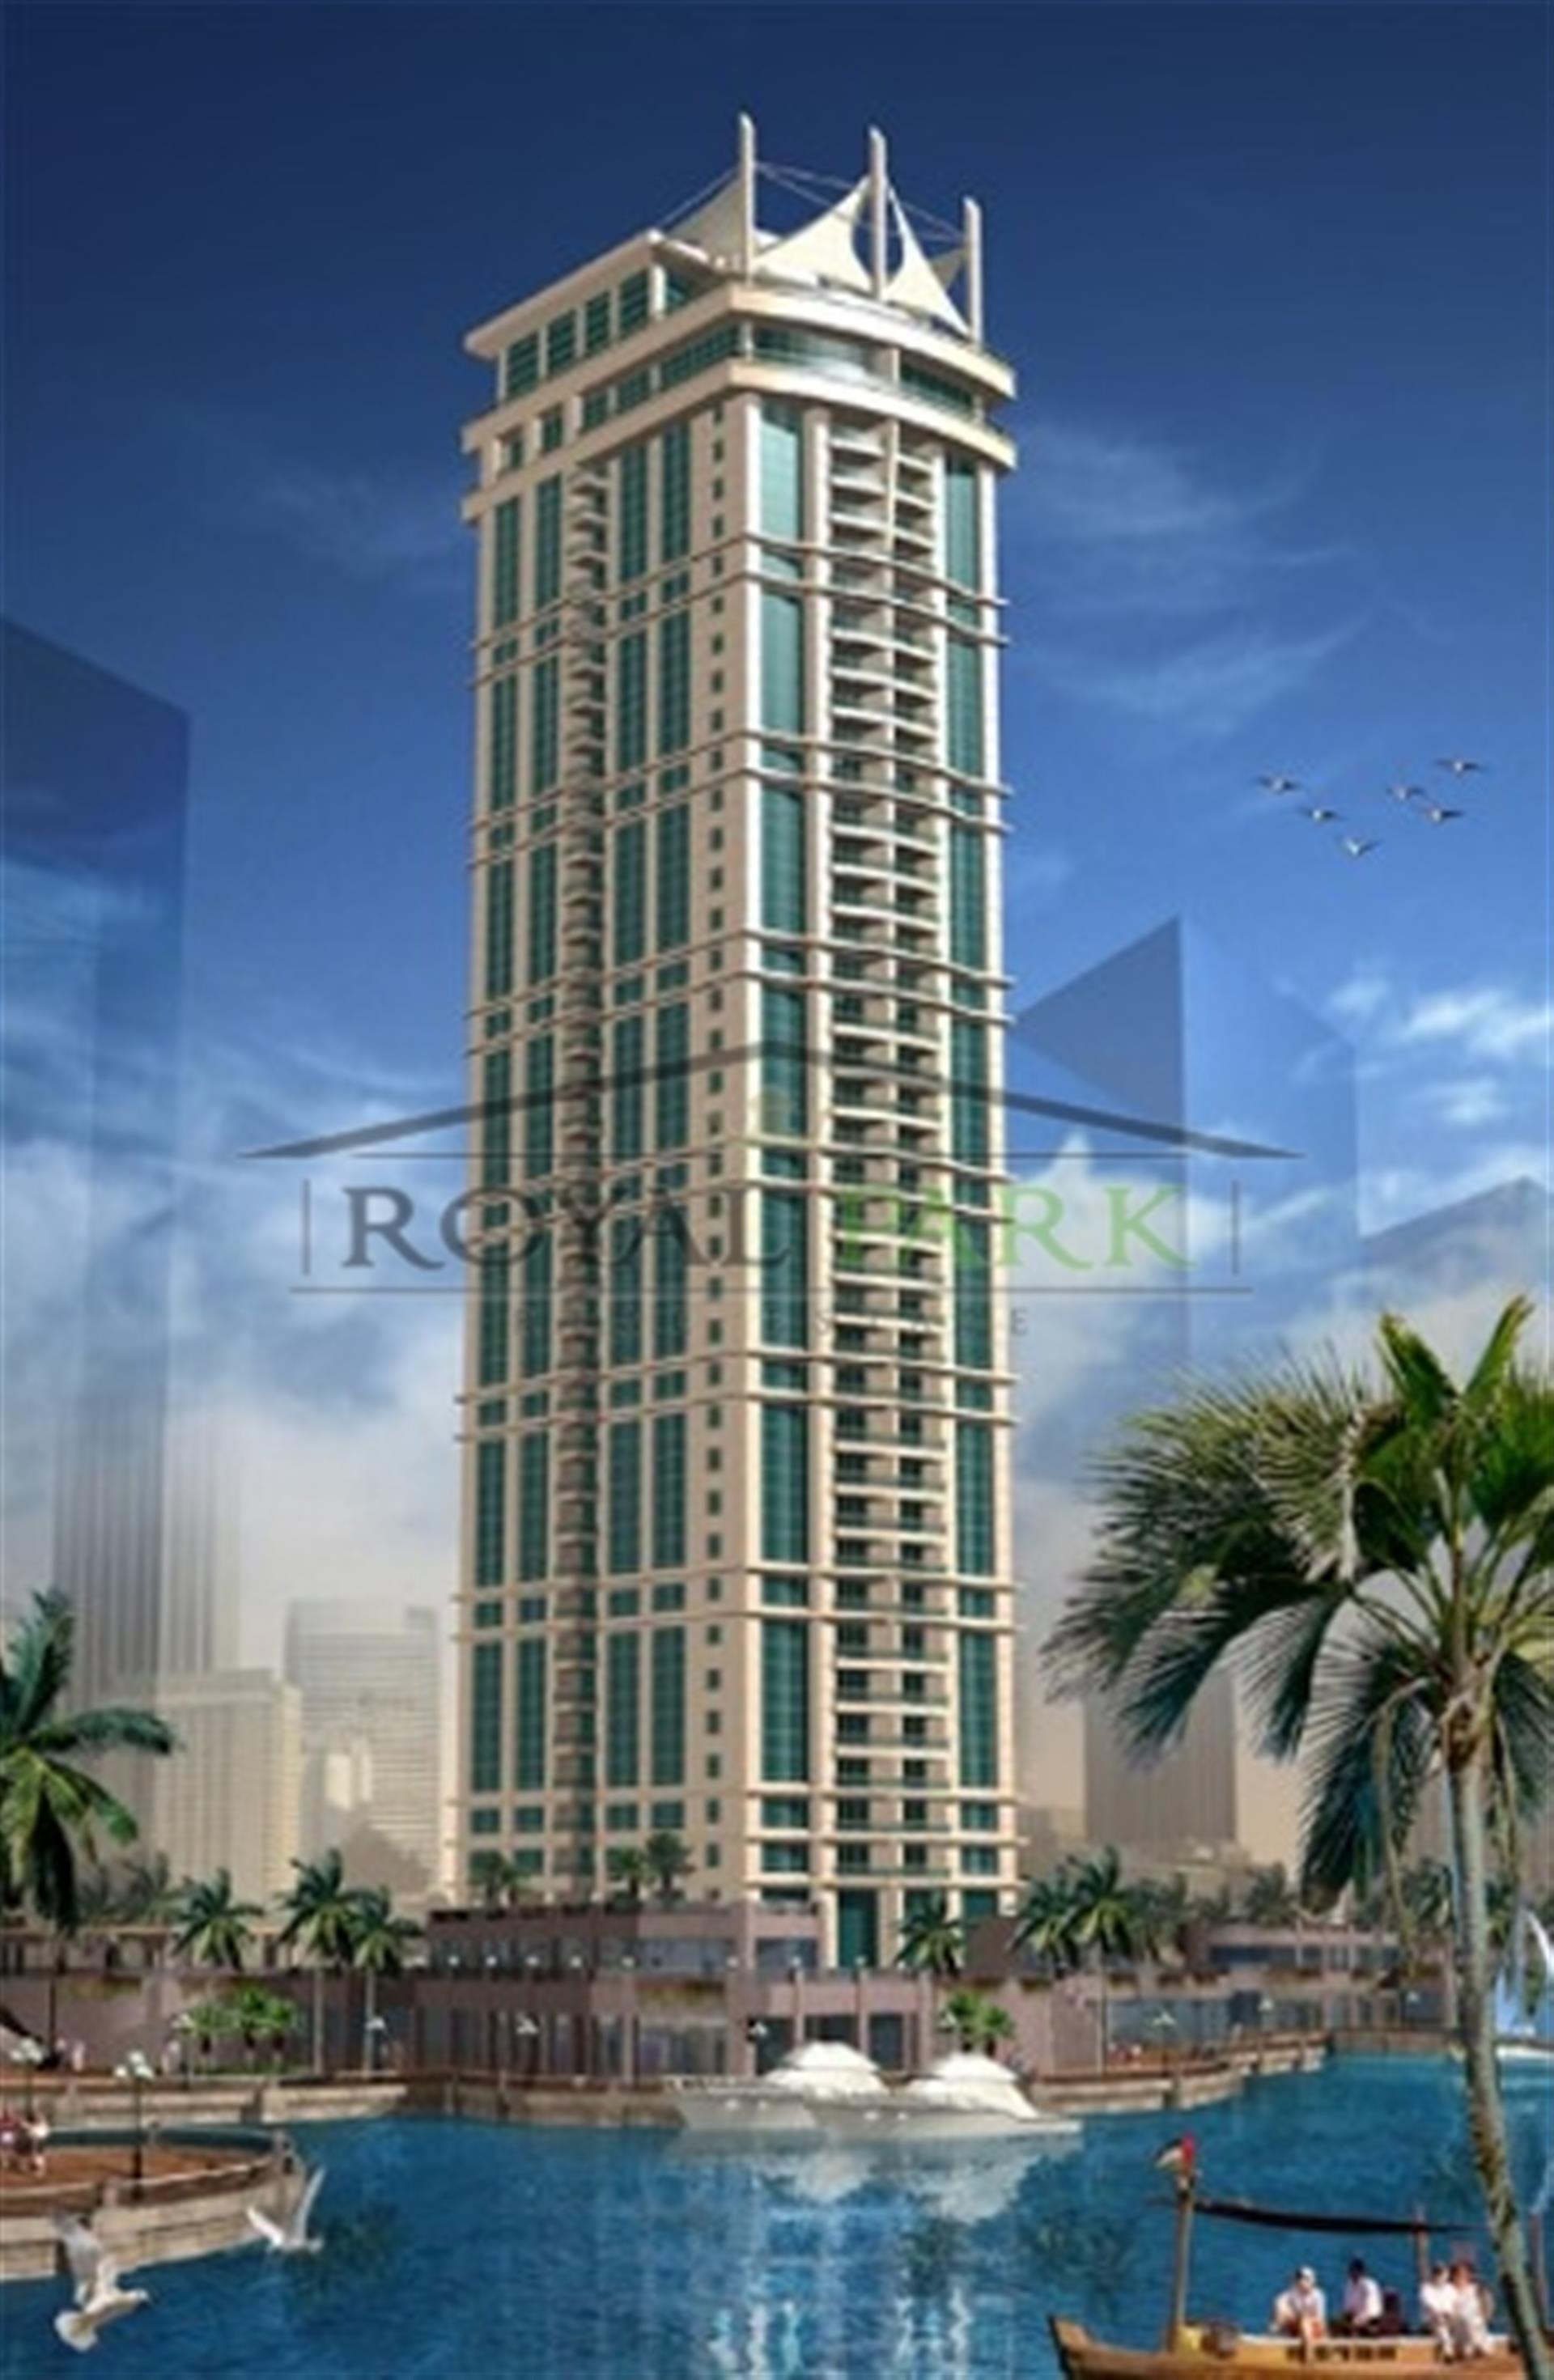 1 Br Apartment For Sale For Aed 1.5million In Al Shera Tower, Jlt